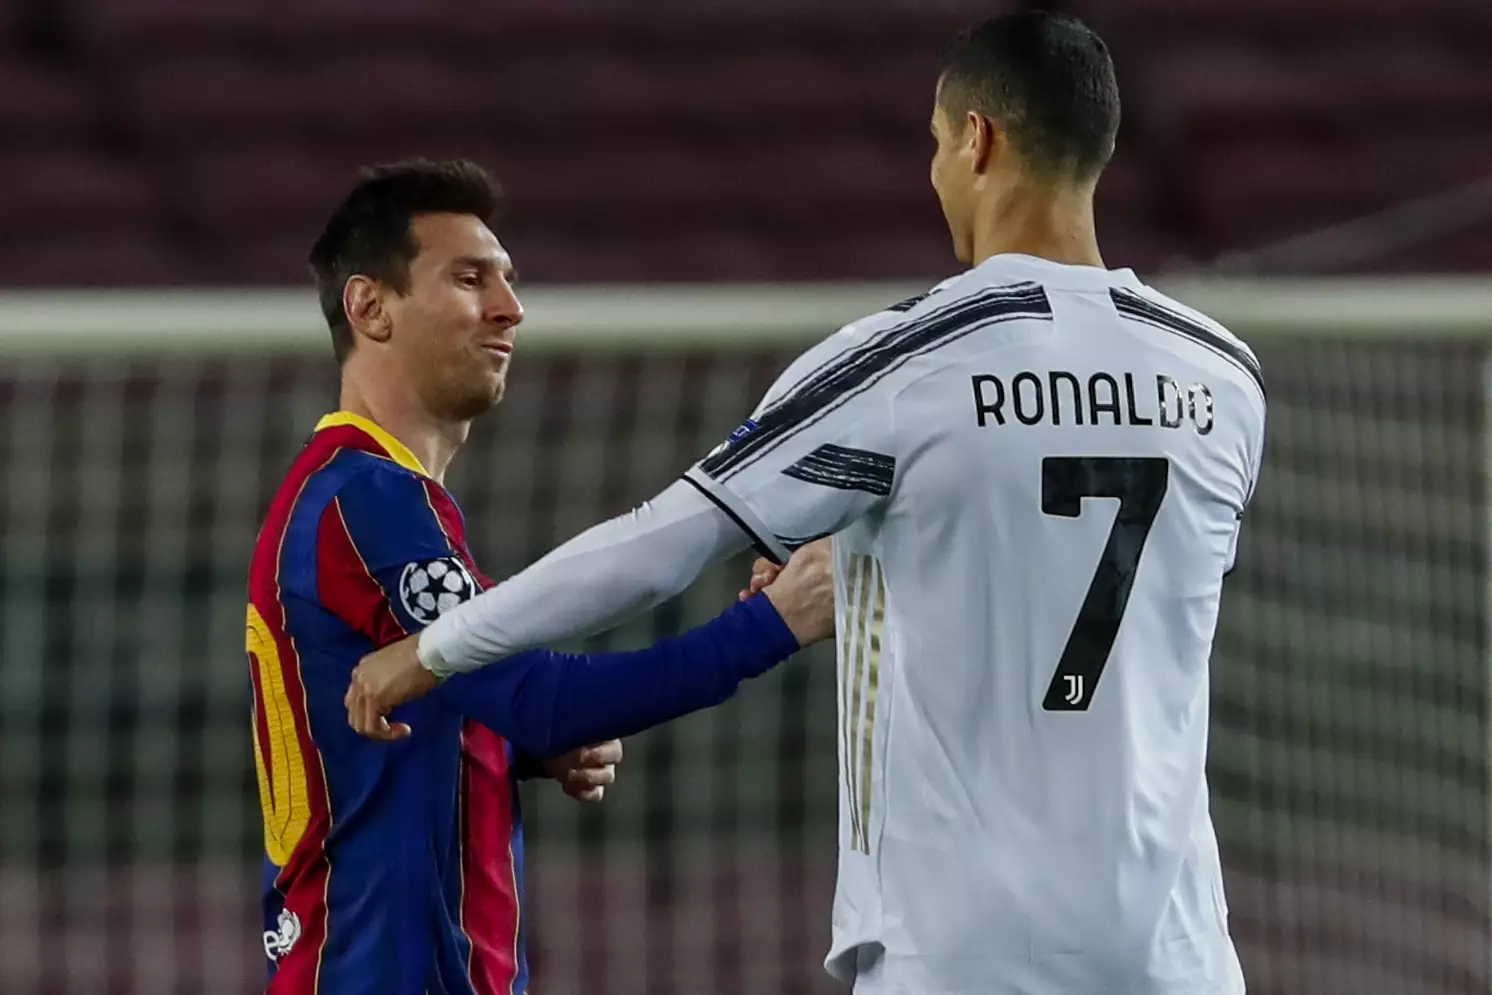 Messi & Ronaldo in the second game, which Ronaldo got to feature in. (Image